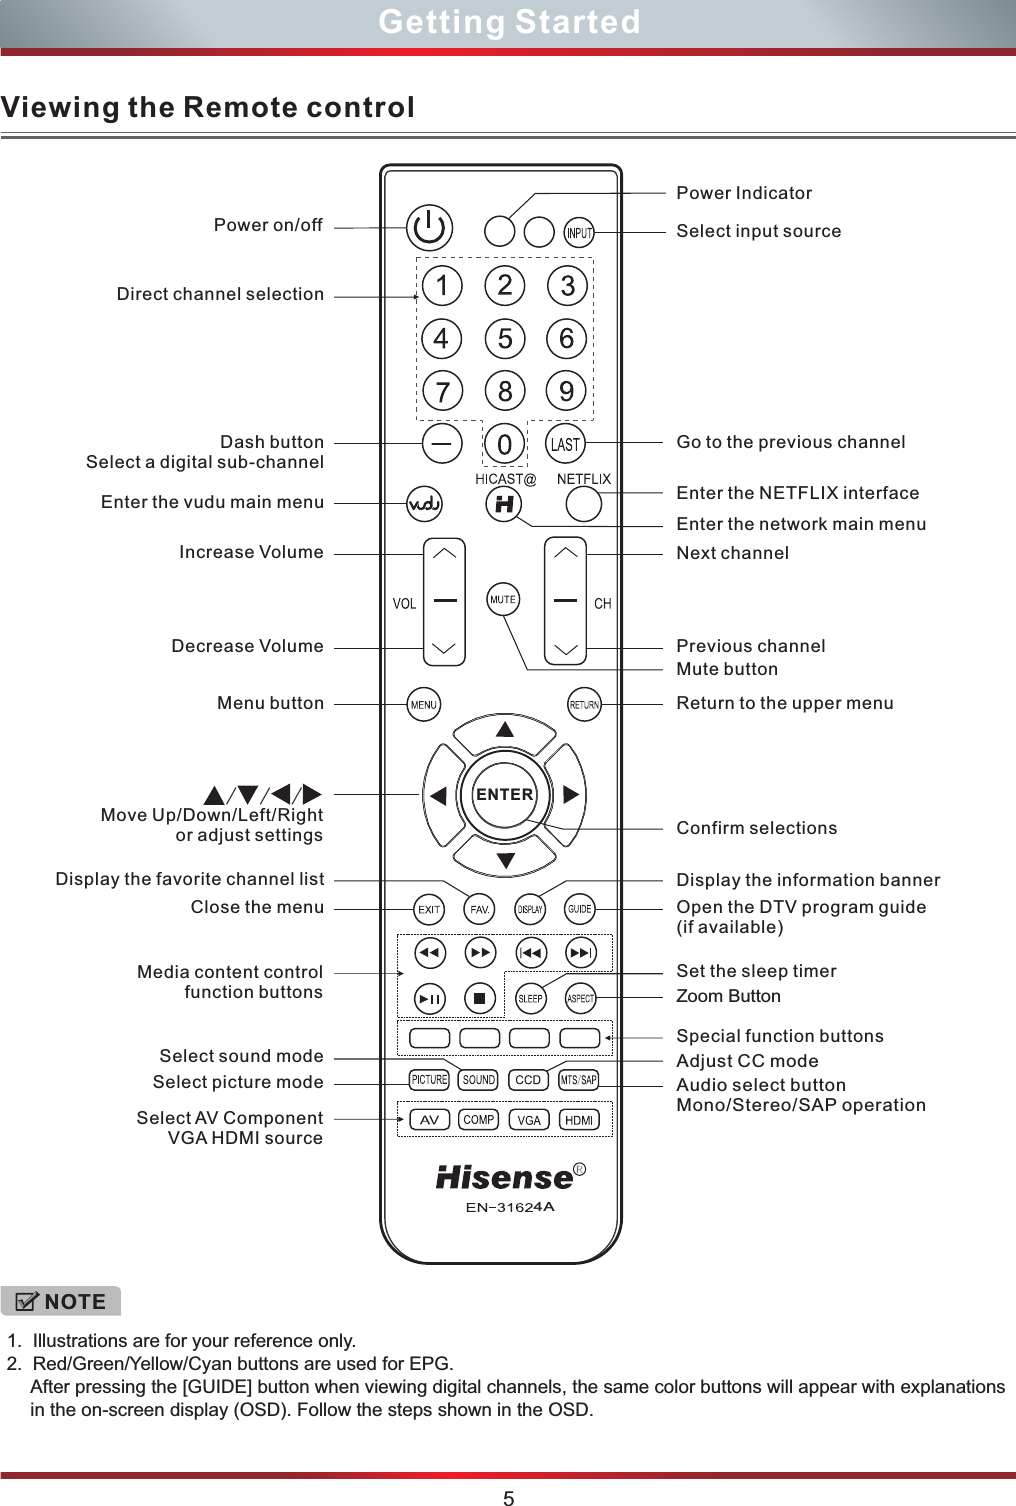 Viewing the Remote control 1.  Illustrations are for your reference only.2.  Red/Green/Yellow/Cyan buttons are used for EPG.After pressing the [GUIDE] button when viewing digital channels, the same color buttons will appear with explanations in the on-screen display (OSD). Follow the steps shown in the OSD.NOTE5Getting StartedSelect input sourceDisplay the information bannerSelect sound modeSelect picture mode/ / /Move Up/Down/Left/Rightor adjust settings Confirm selectionsSpecial function buttonsSelect AV Component  VGA  sourceHDMI Media content control function buttonsSet the sleep timerAudio select buttonMono/Stereo/SAP operationZoom ButtonAdjust CC mode Open the DTV program guide(if available)Power on/offDirect channel selectionMute buttonNext channelEnter the network main menuEnter the NETFLIX interfaceEnter the vudu main menuPower IndicatorPrevious channelReturn to the upper menu Increase VolumeDecrease VolumeMenu buttonClose the menuDisplay the favorite channel listGo to the previous channel Dash buttonSelect a digital sub-channelENTER4A